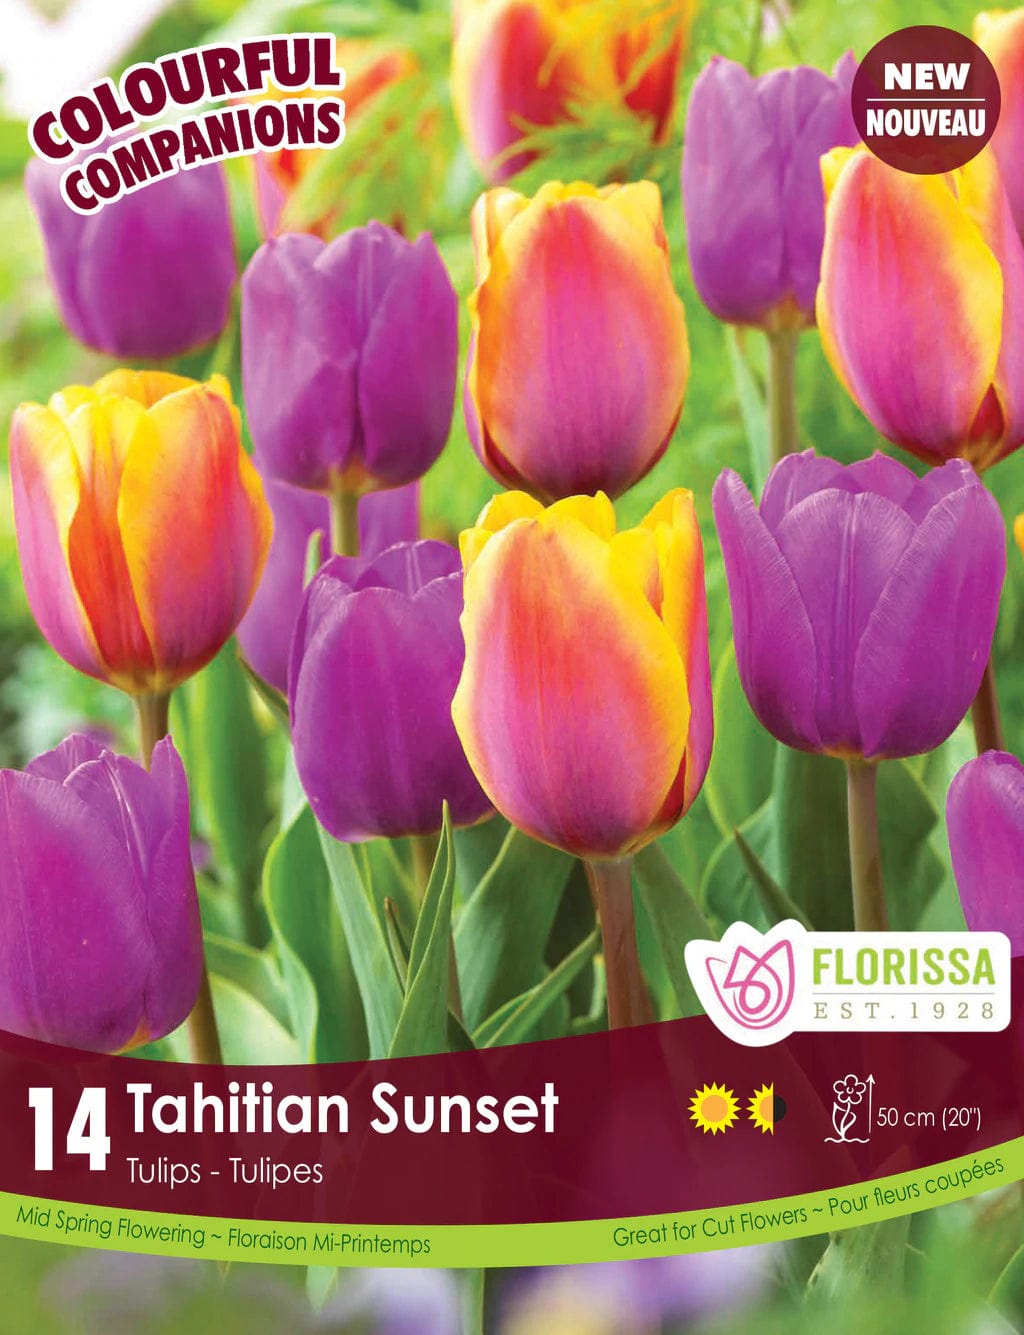 Tulips - Tahitian Sunset, Colourful Companions, 14 Pack